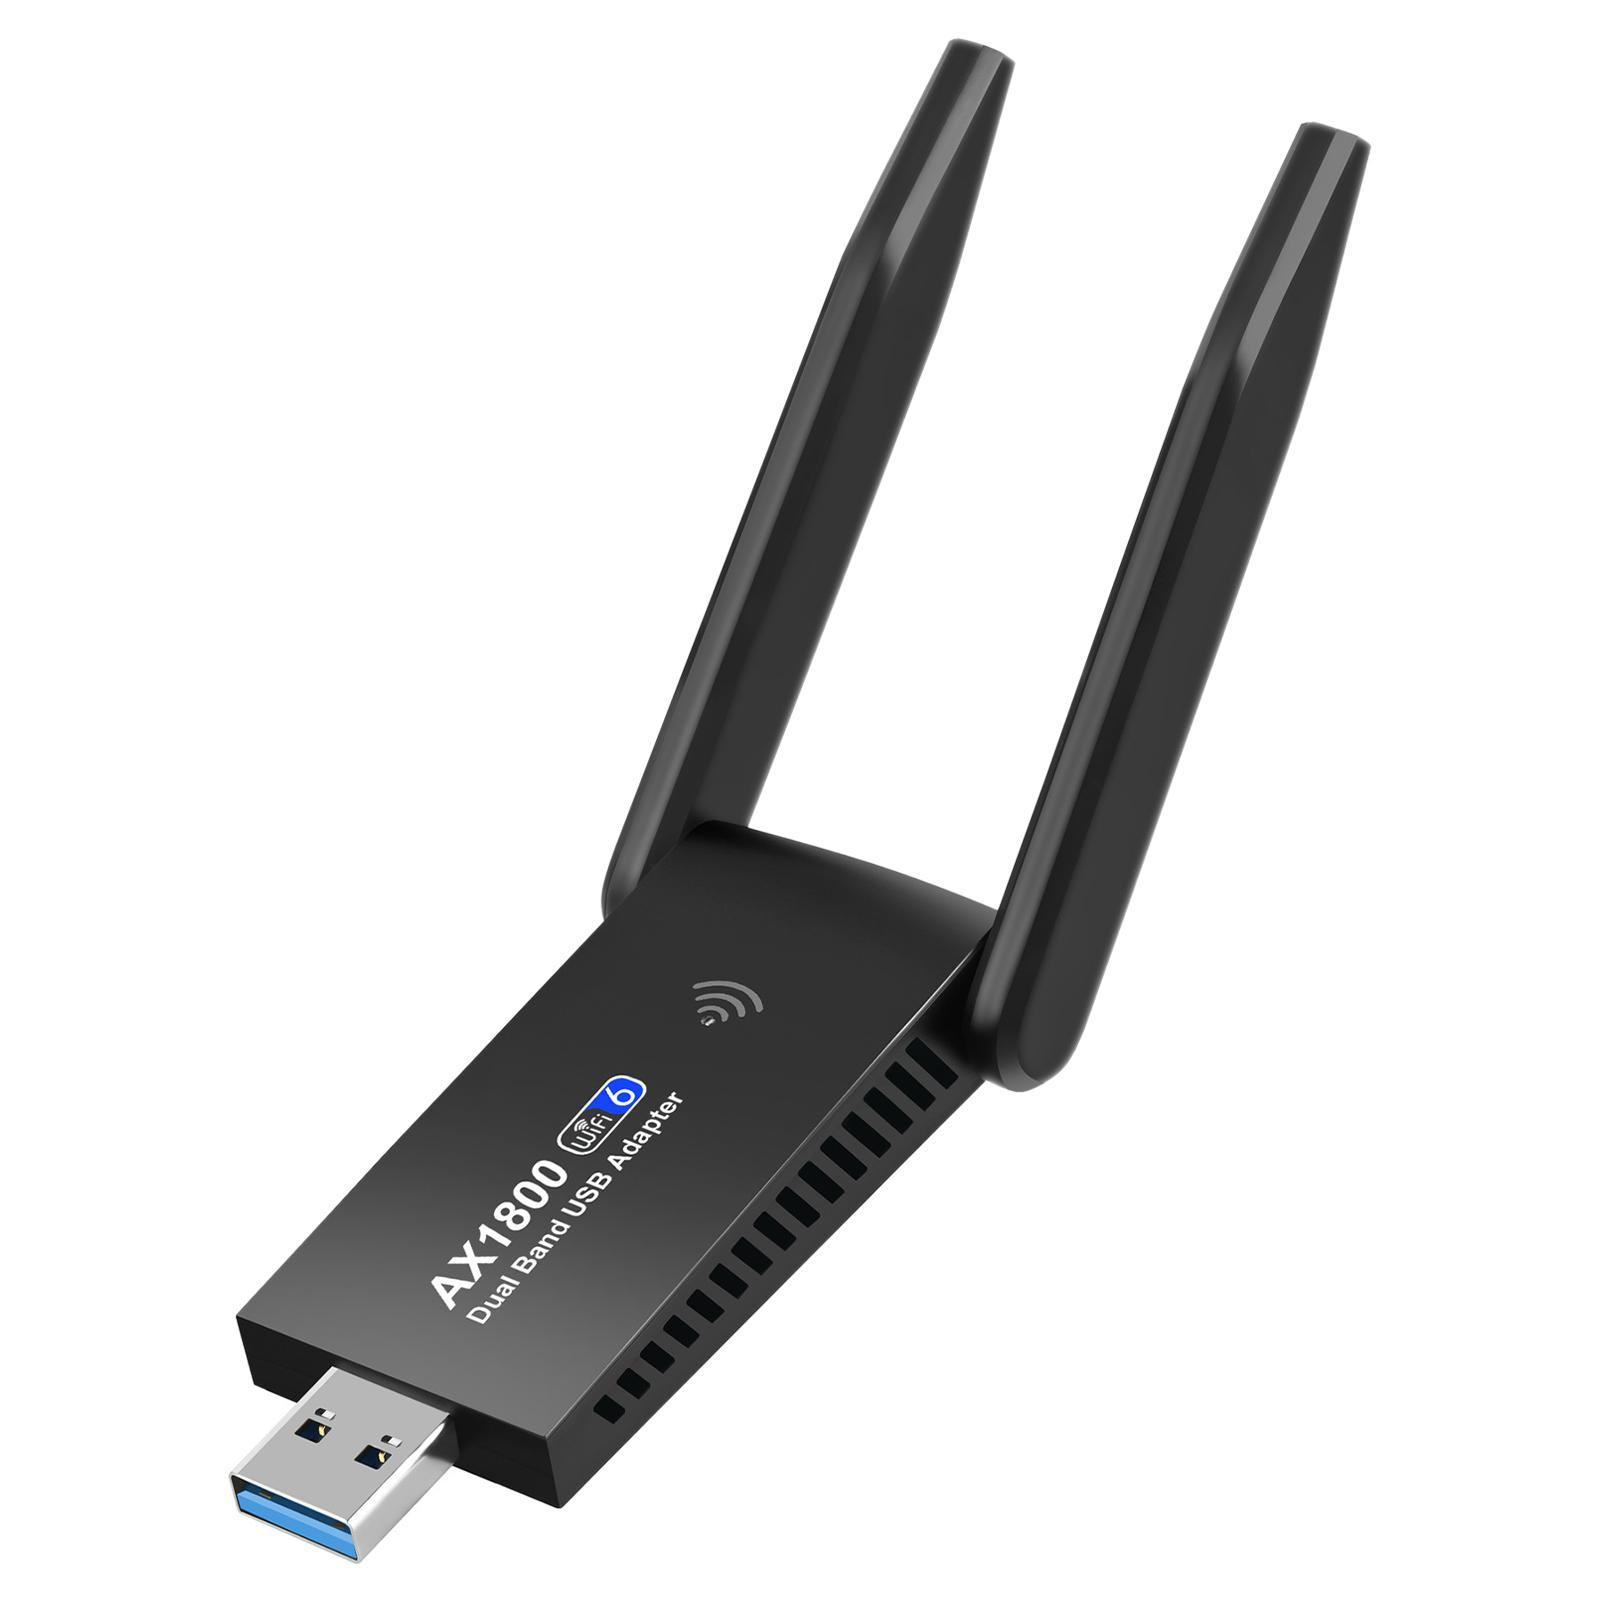 USB WiFi Adapter 1800Mbps Dual Band for Win11/10/7 WiFi 6 Wireless Network Adapter for Desktop Gaming PC